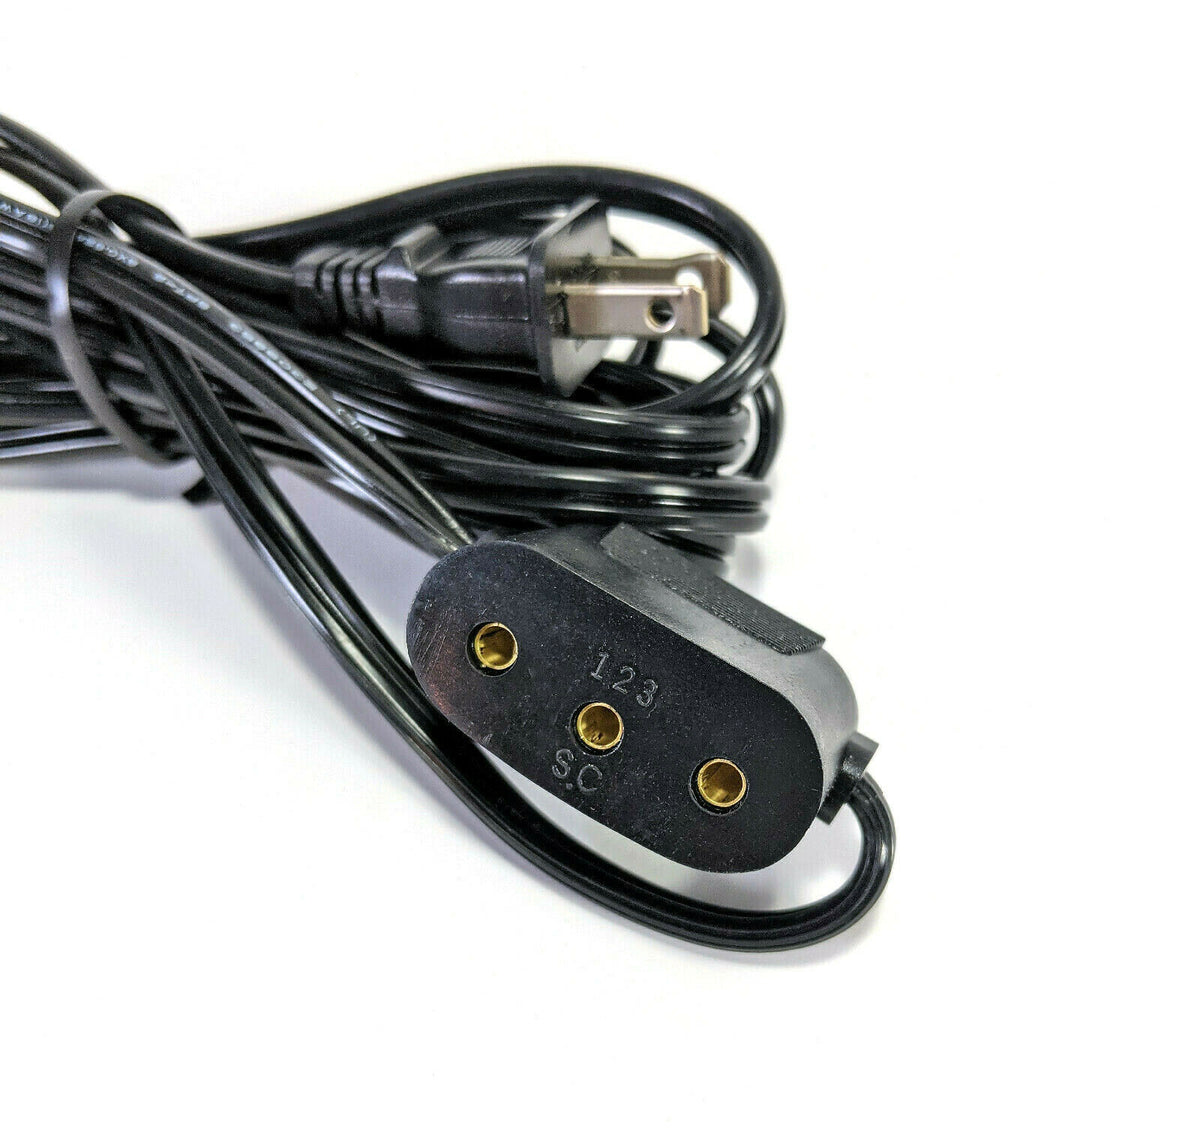 New Singer Sewing Machine Double Lead Foot Pedal Power Cord 221